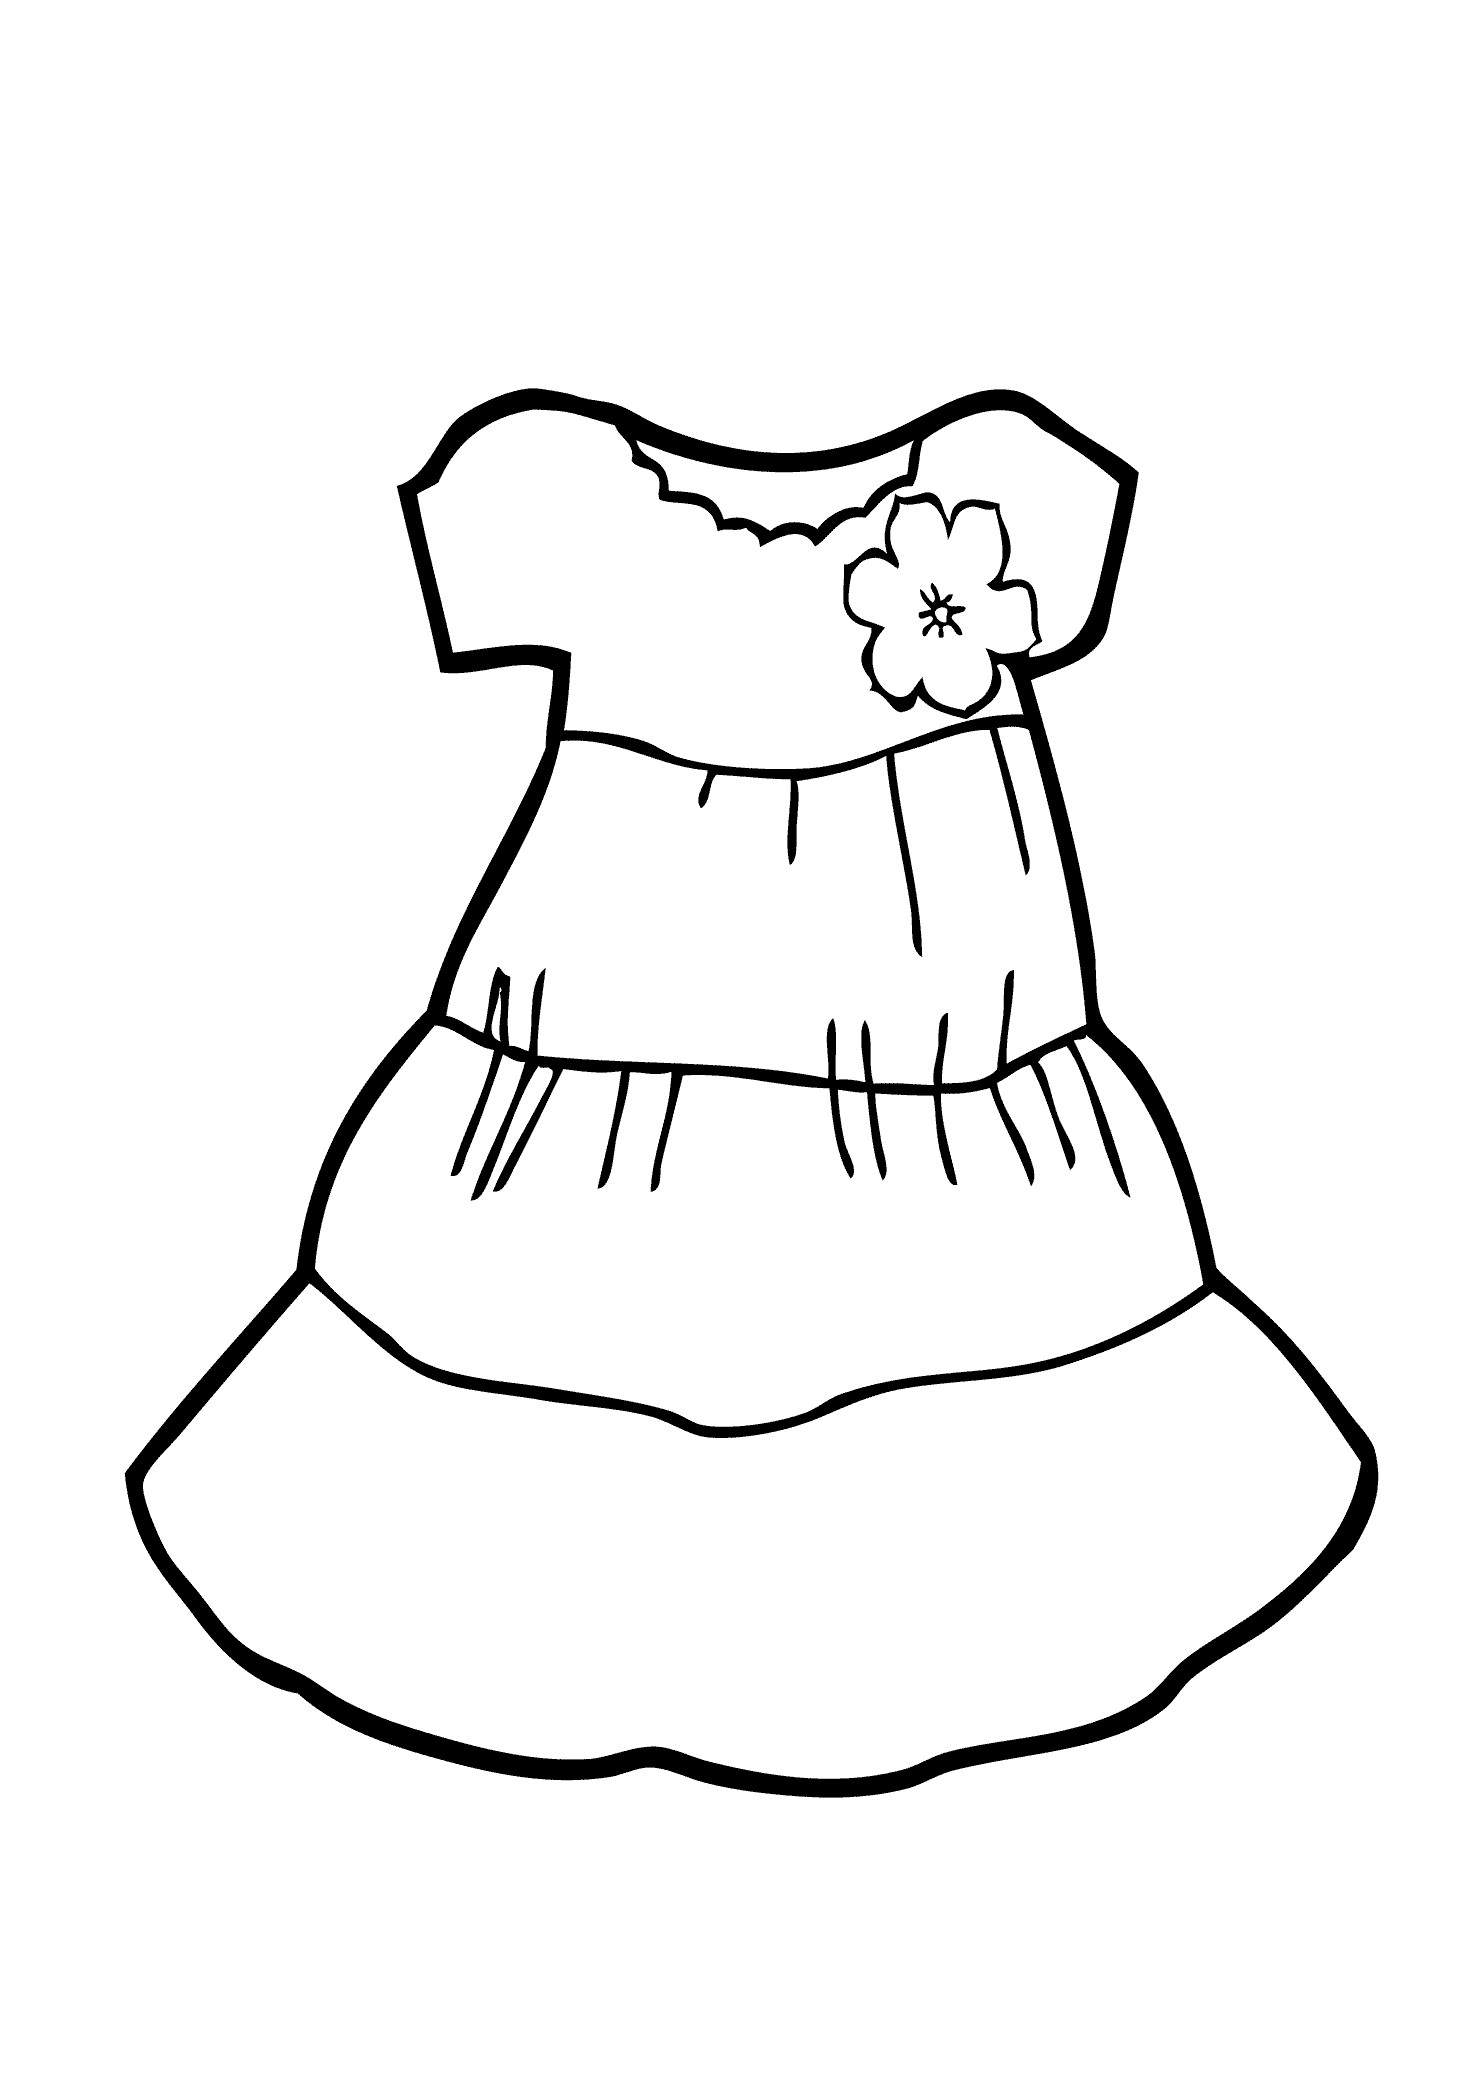 Free Coloring Sheets Of Kids Dressed In Career Clothing
 Dress Coloring Pages Bestofcoloring